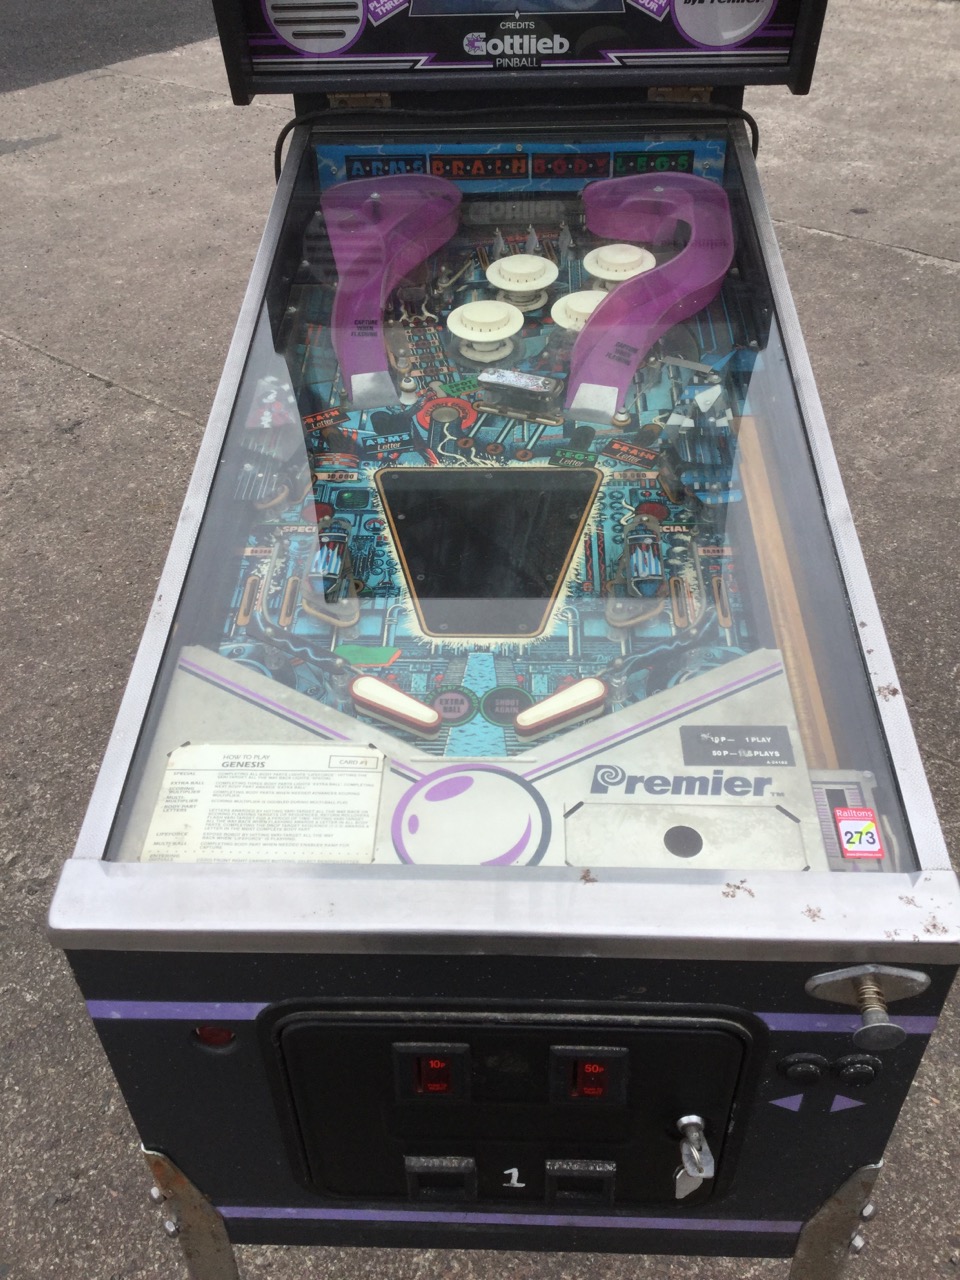 A 80s Cottlieb Premier Genesis pinball machine, with angled gaming board under glass - Image 2 of 3